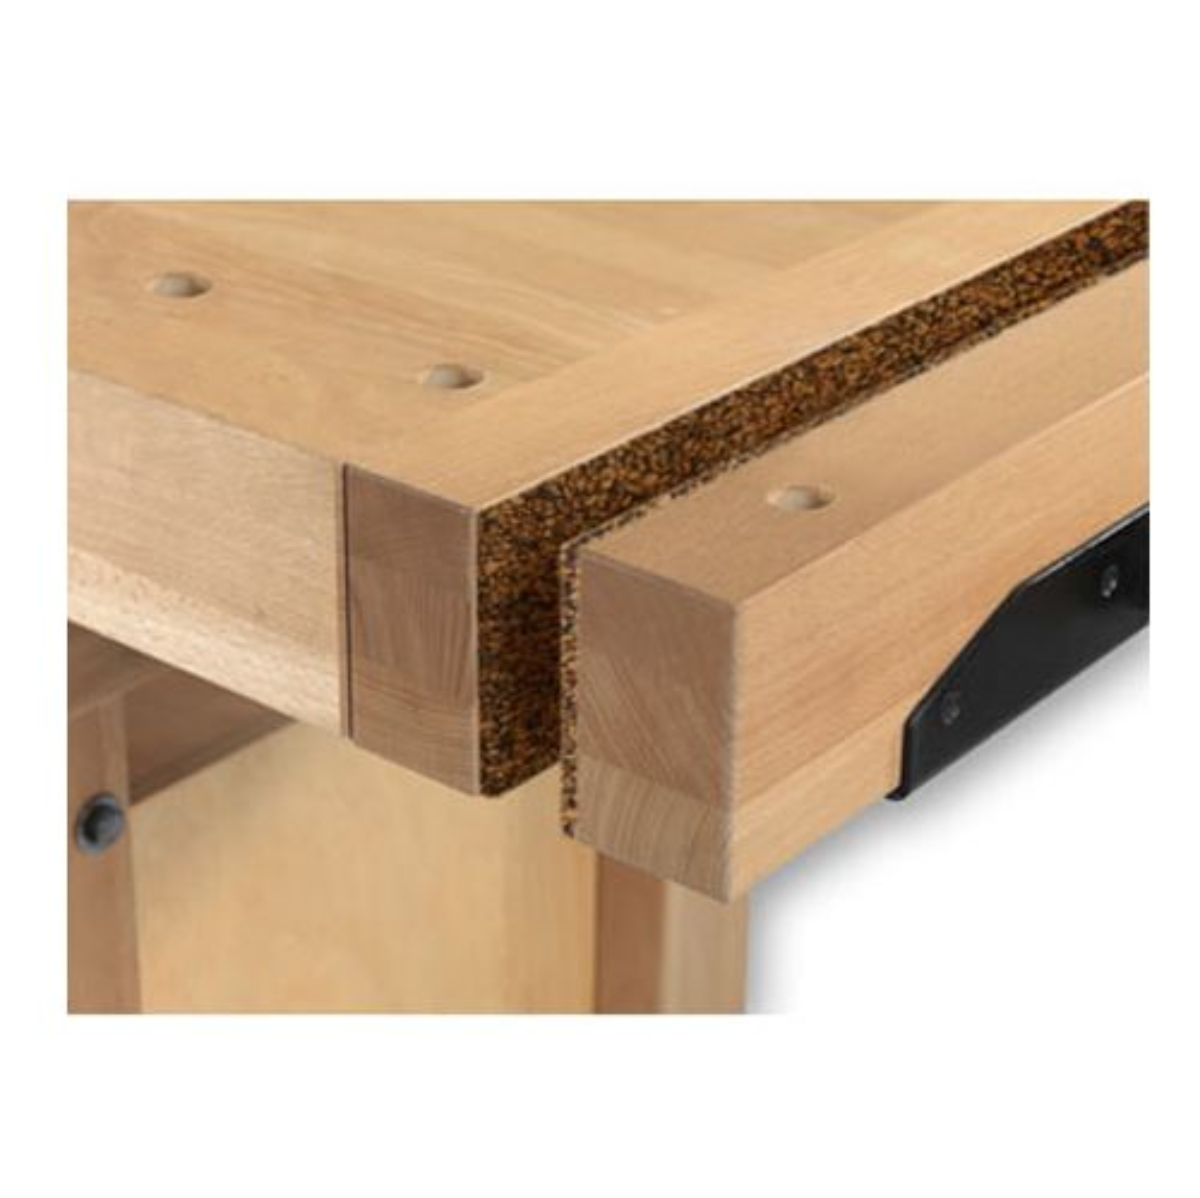 Sjobergs Rubber/Cork Jaw Protectors For Elite bench